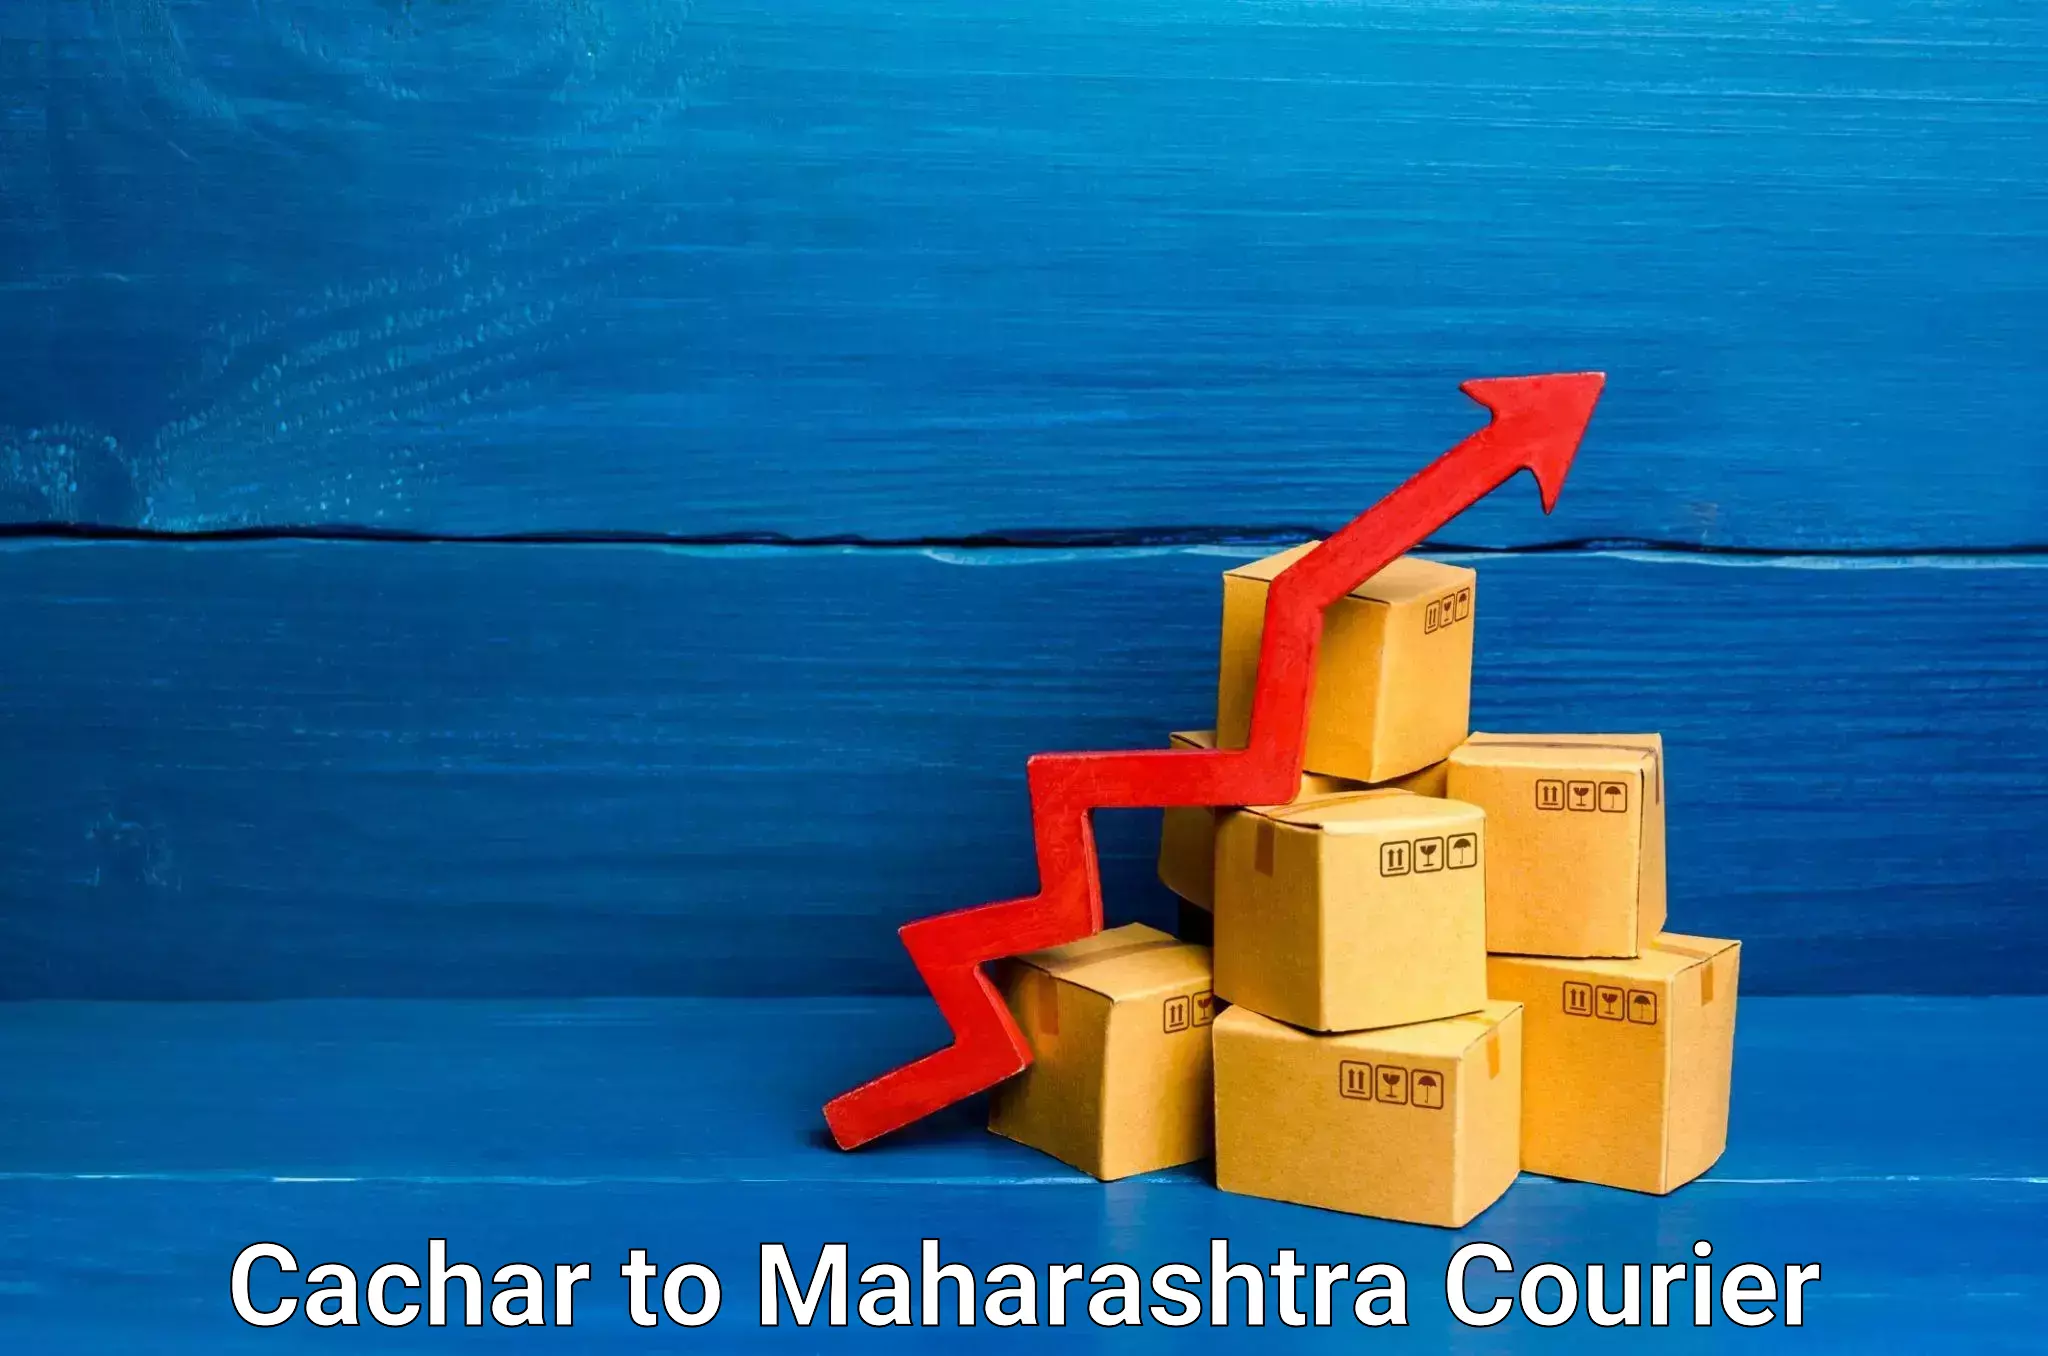 Courier service partnerships Cachar to Jalna